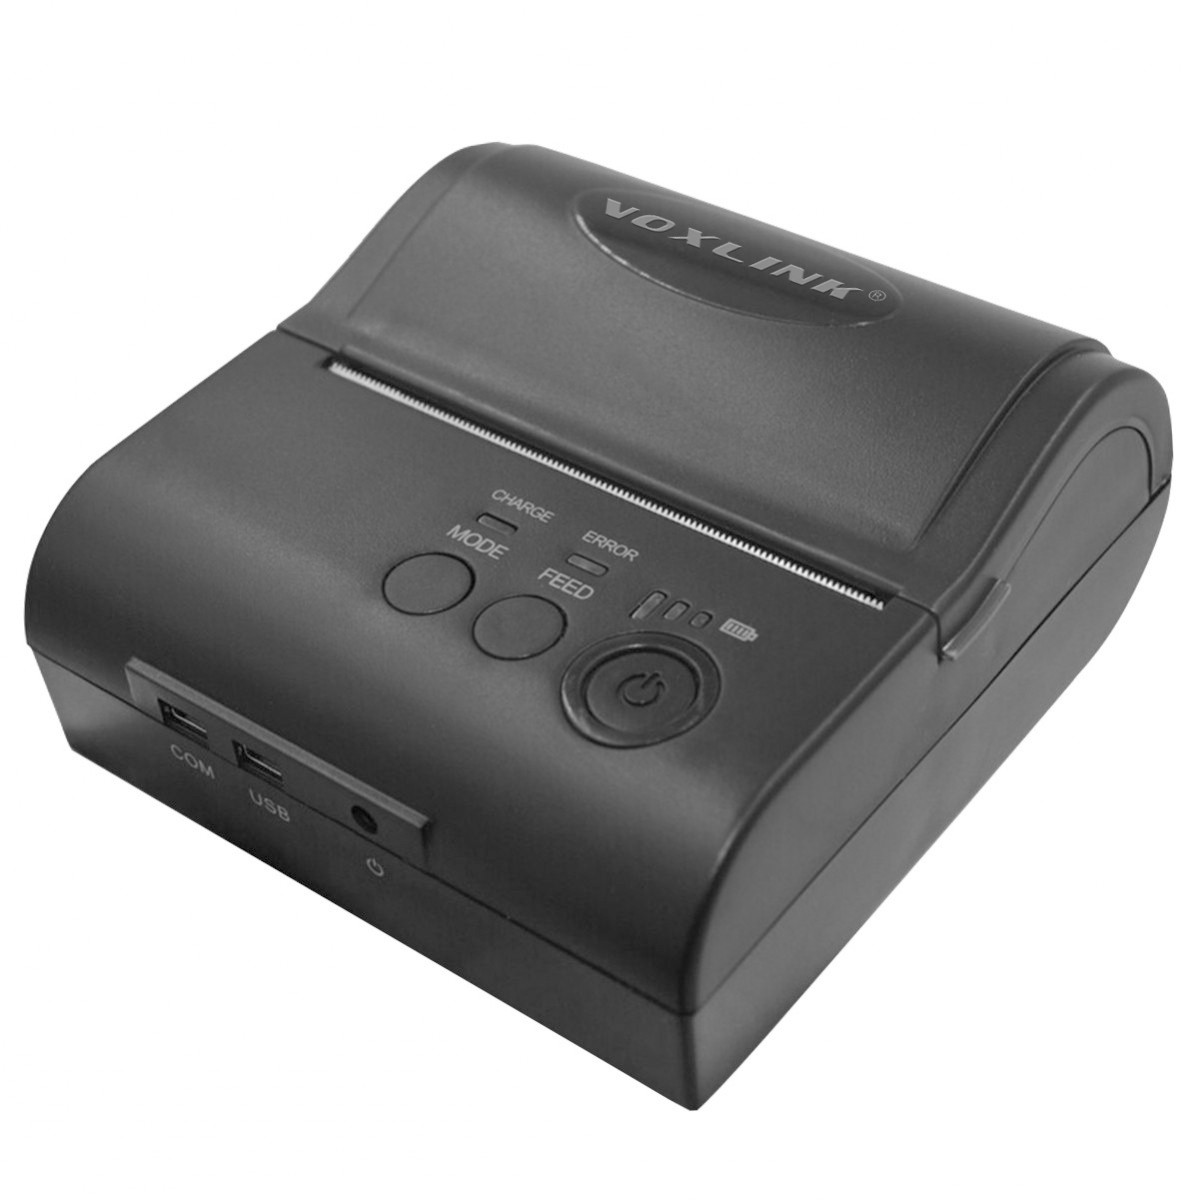 80mm Bluetooth Thermal Printer Portable Wireless USB Serial COM Port High Speed Receipt Printer Android iOS Windows Compatible For POS